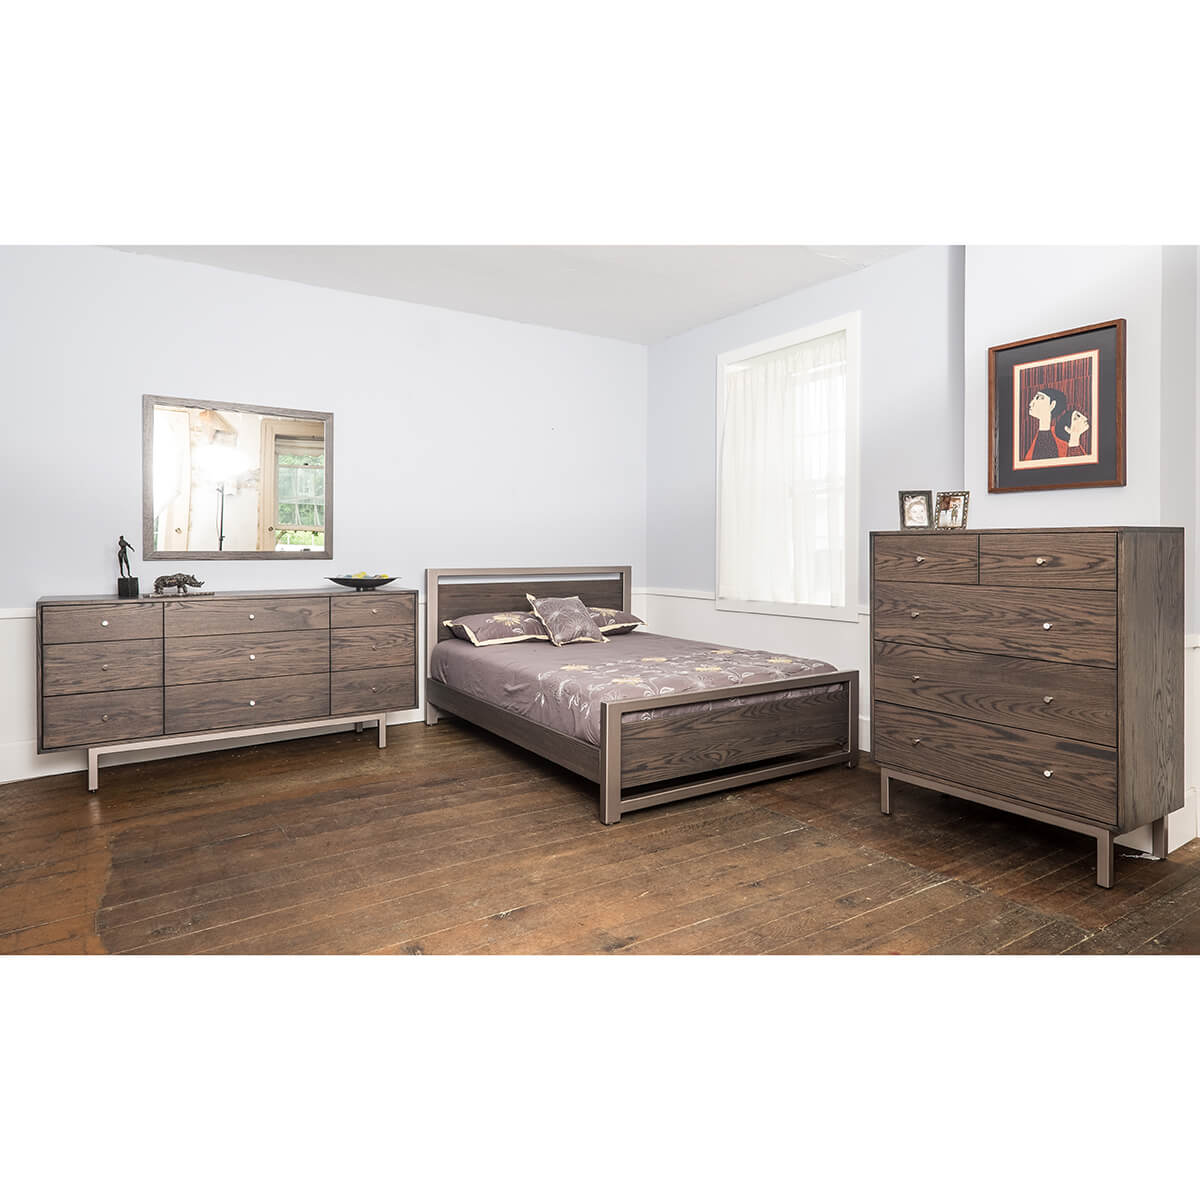 Read more about the article Sullivan Cove Bedroom Collection